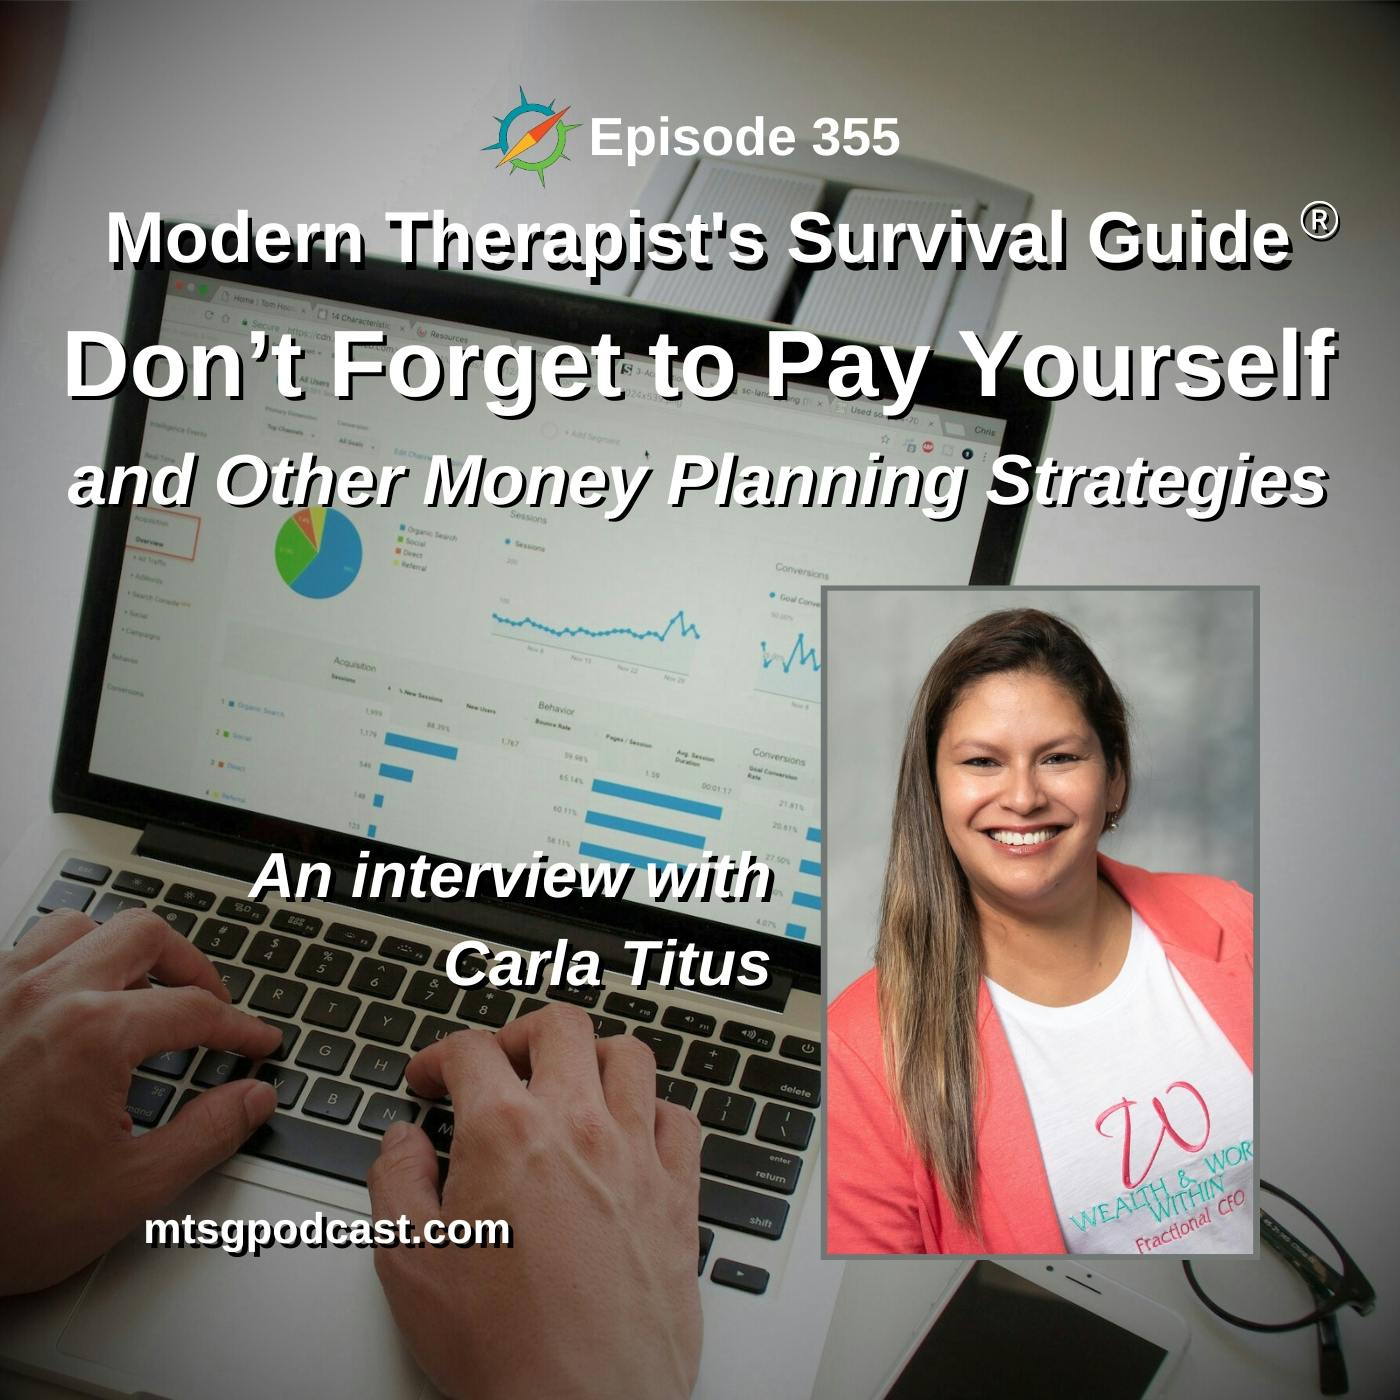 Don’t Forget to Pay Yourself and Other Money Planning Strategies: An interview with Carla Titus